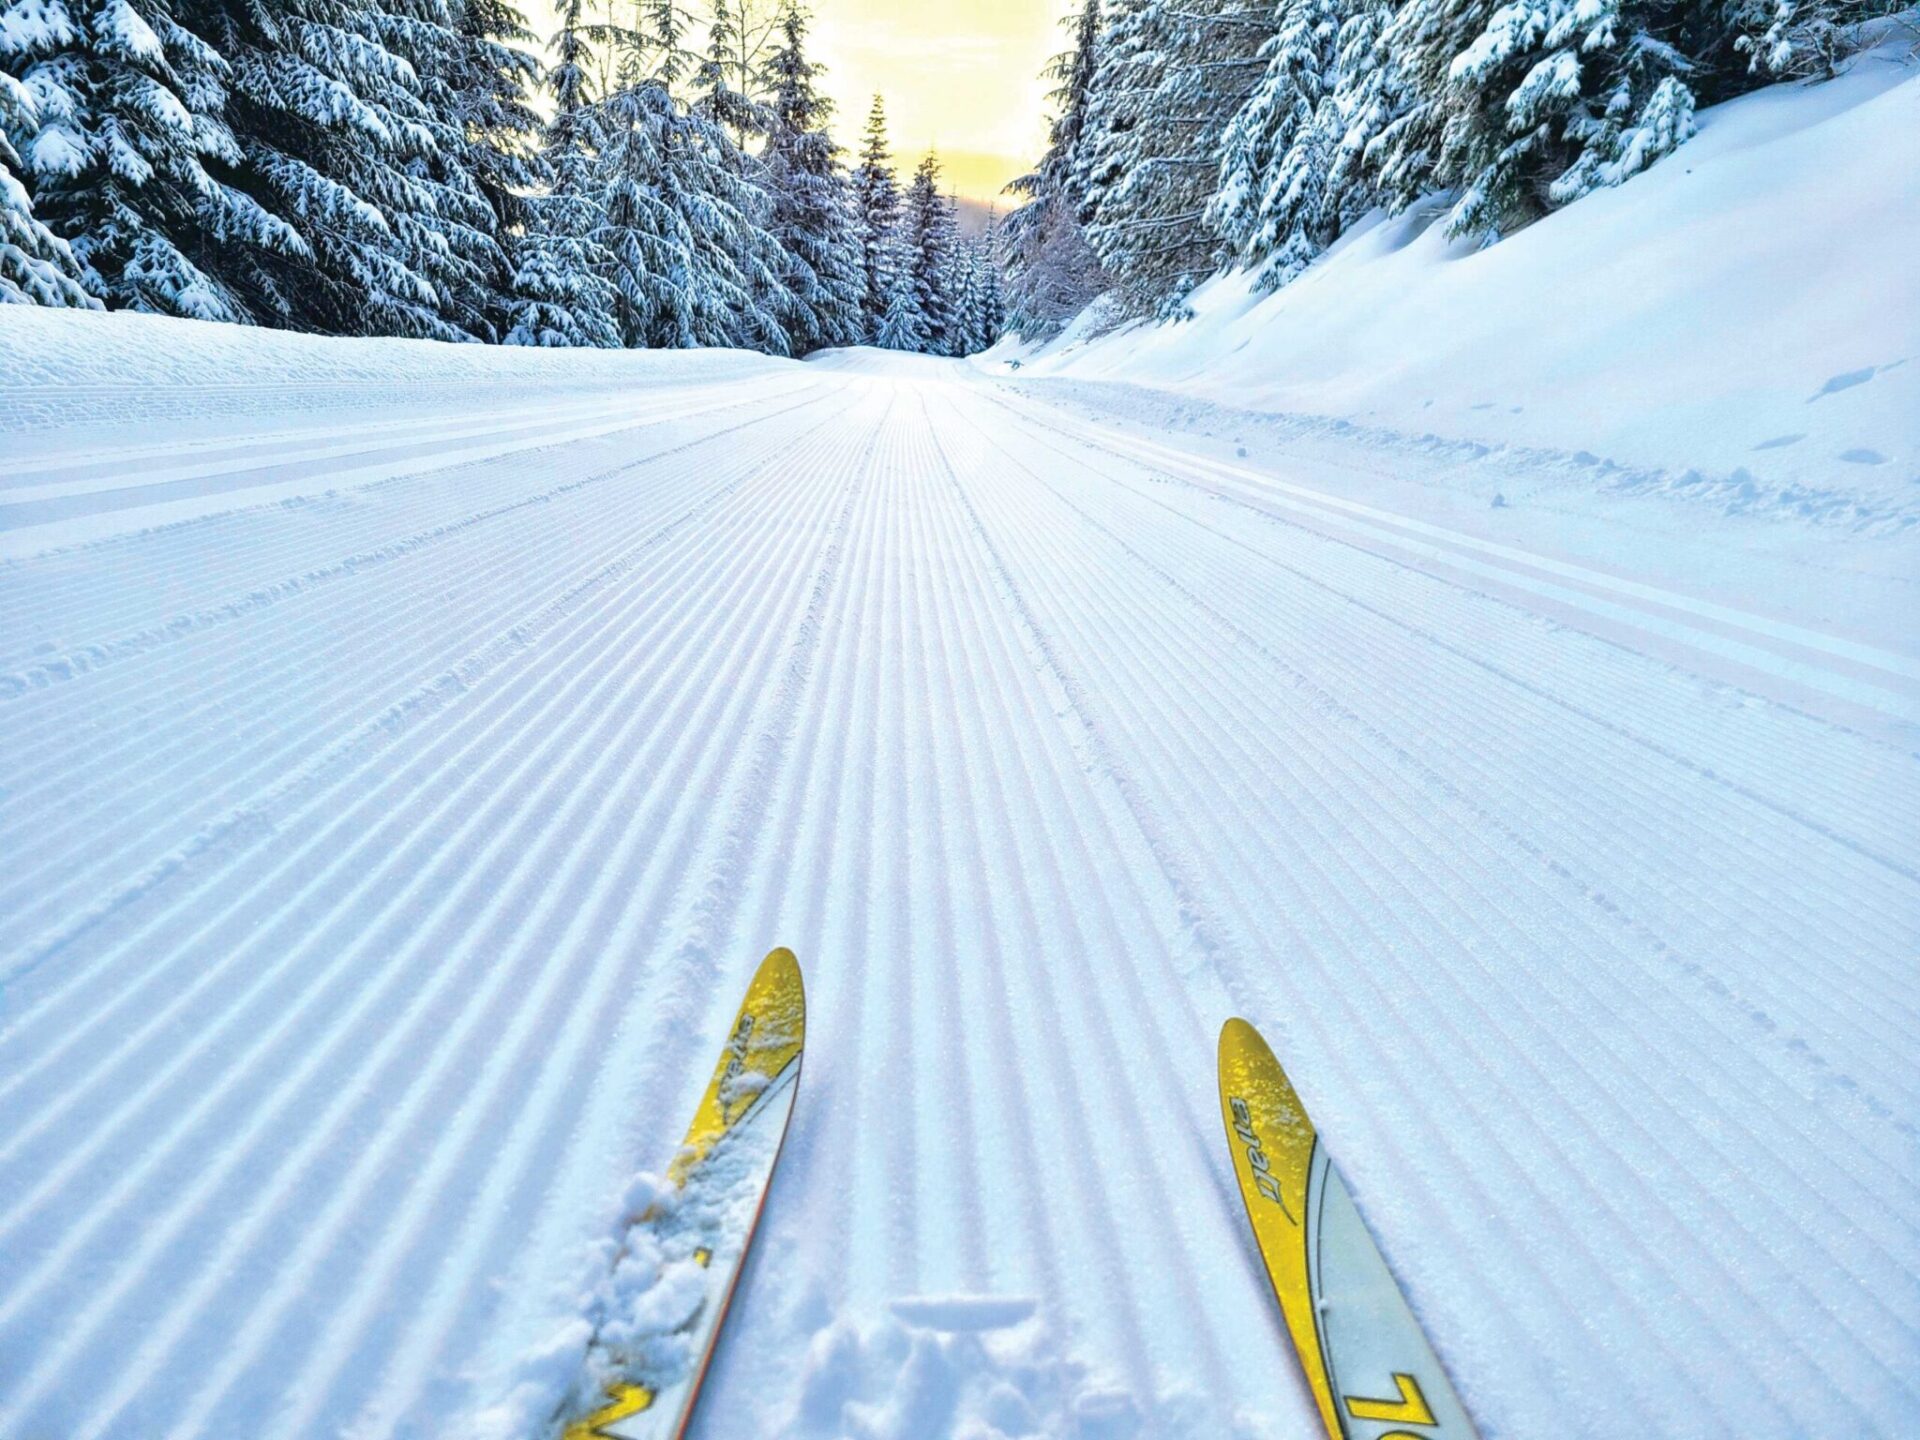 View of cross-country ski tips along snow groomed corduroy trail..